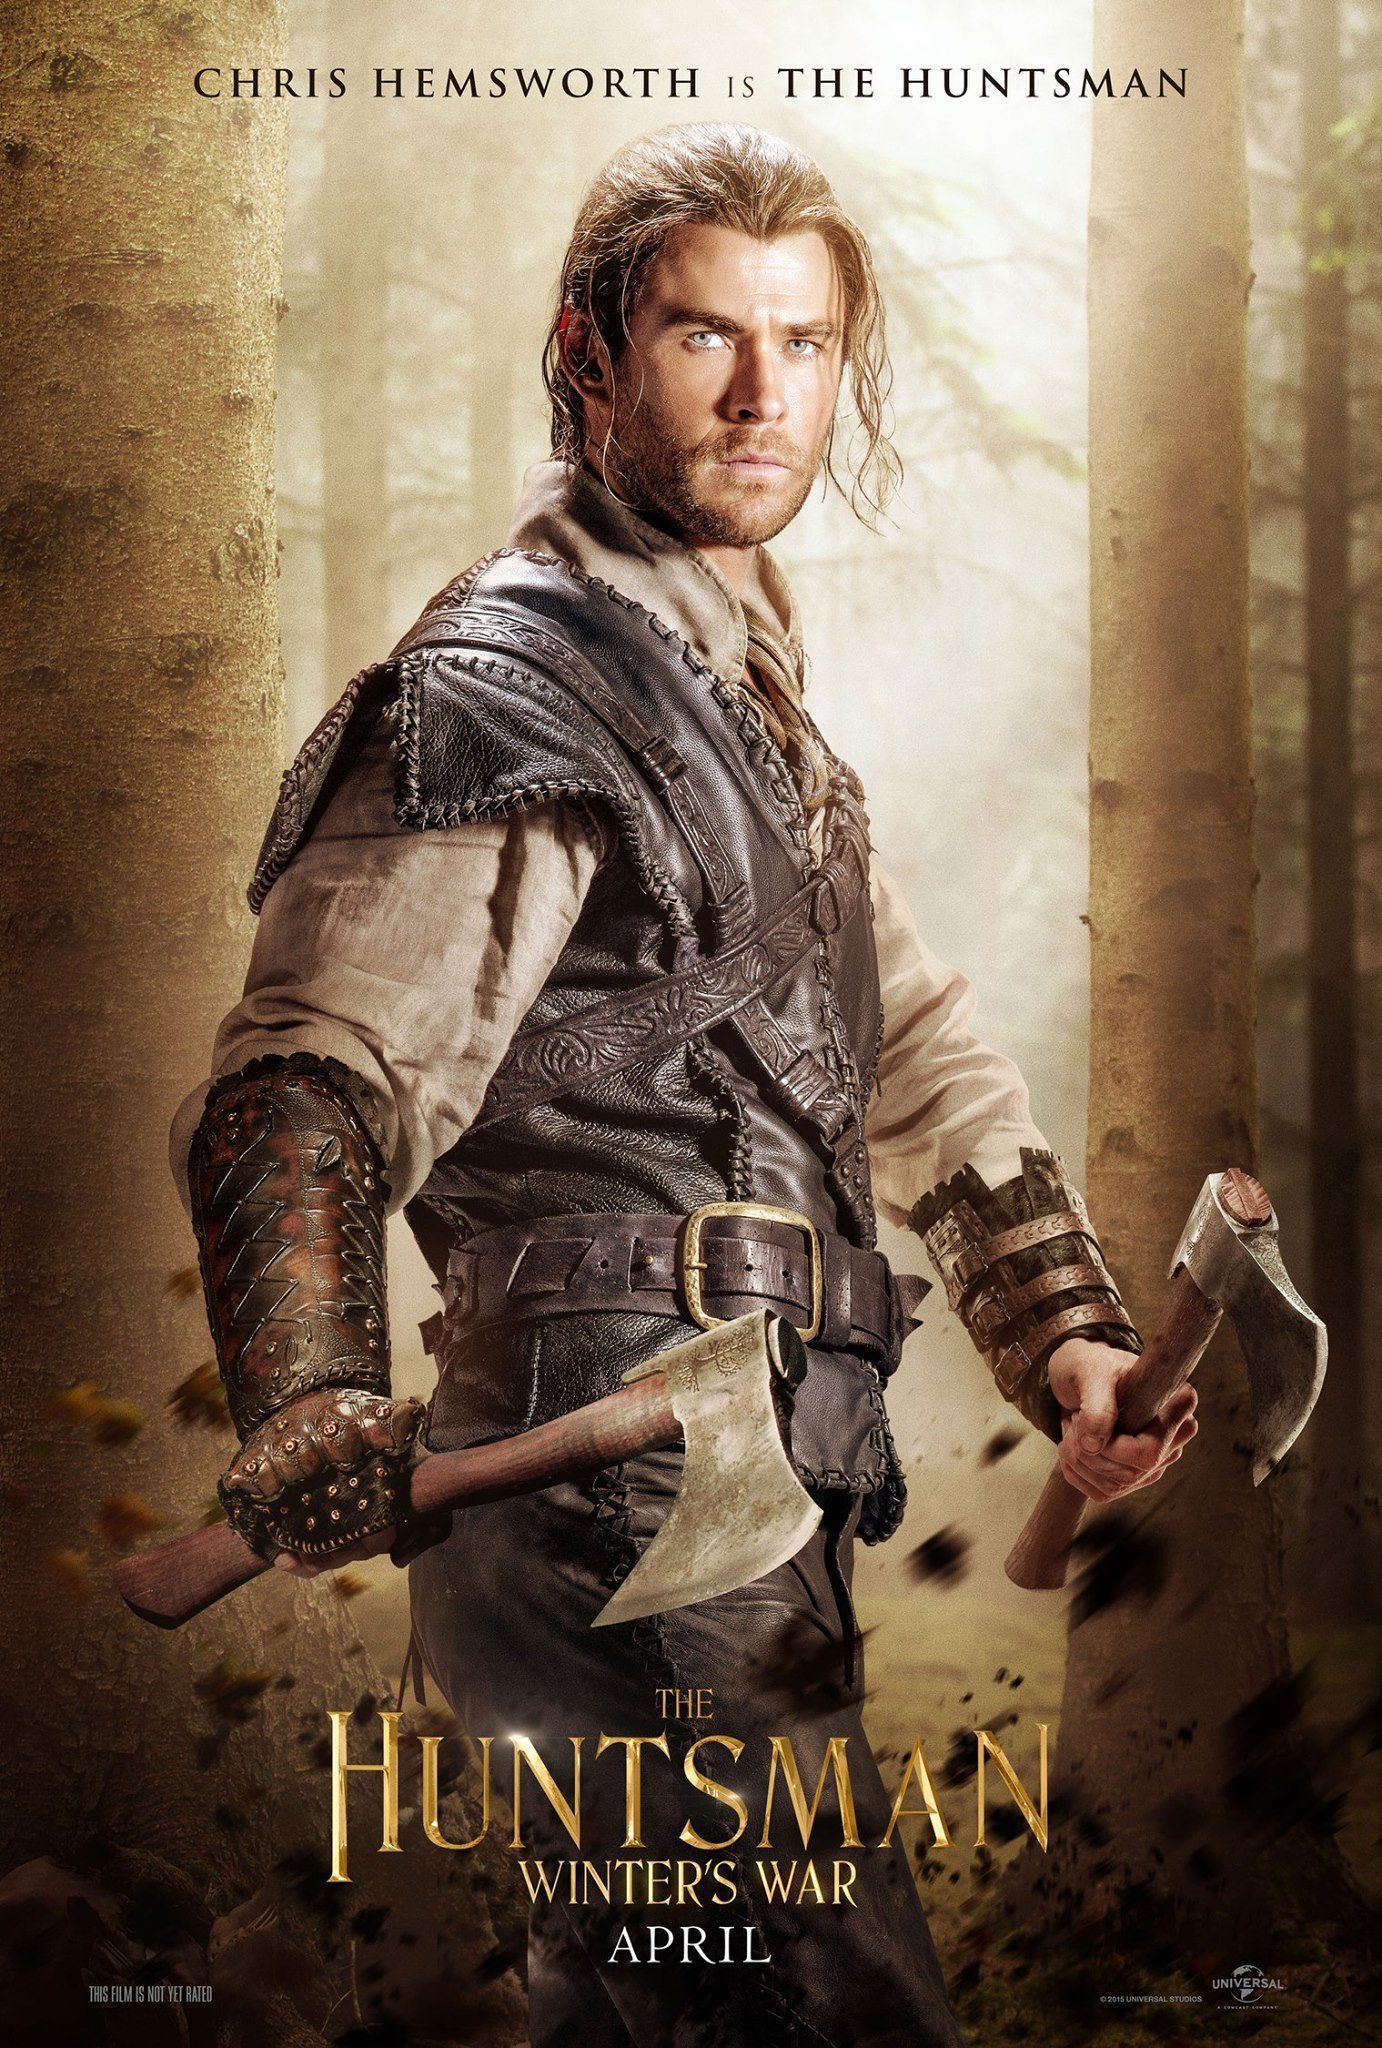 The Huntsman Gets an Official Title, Synopsis, & Character Posters